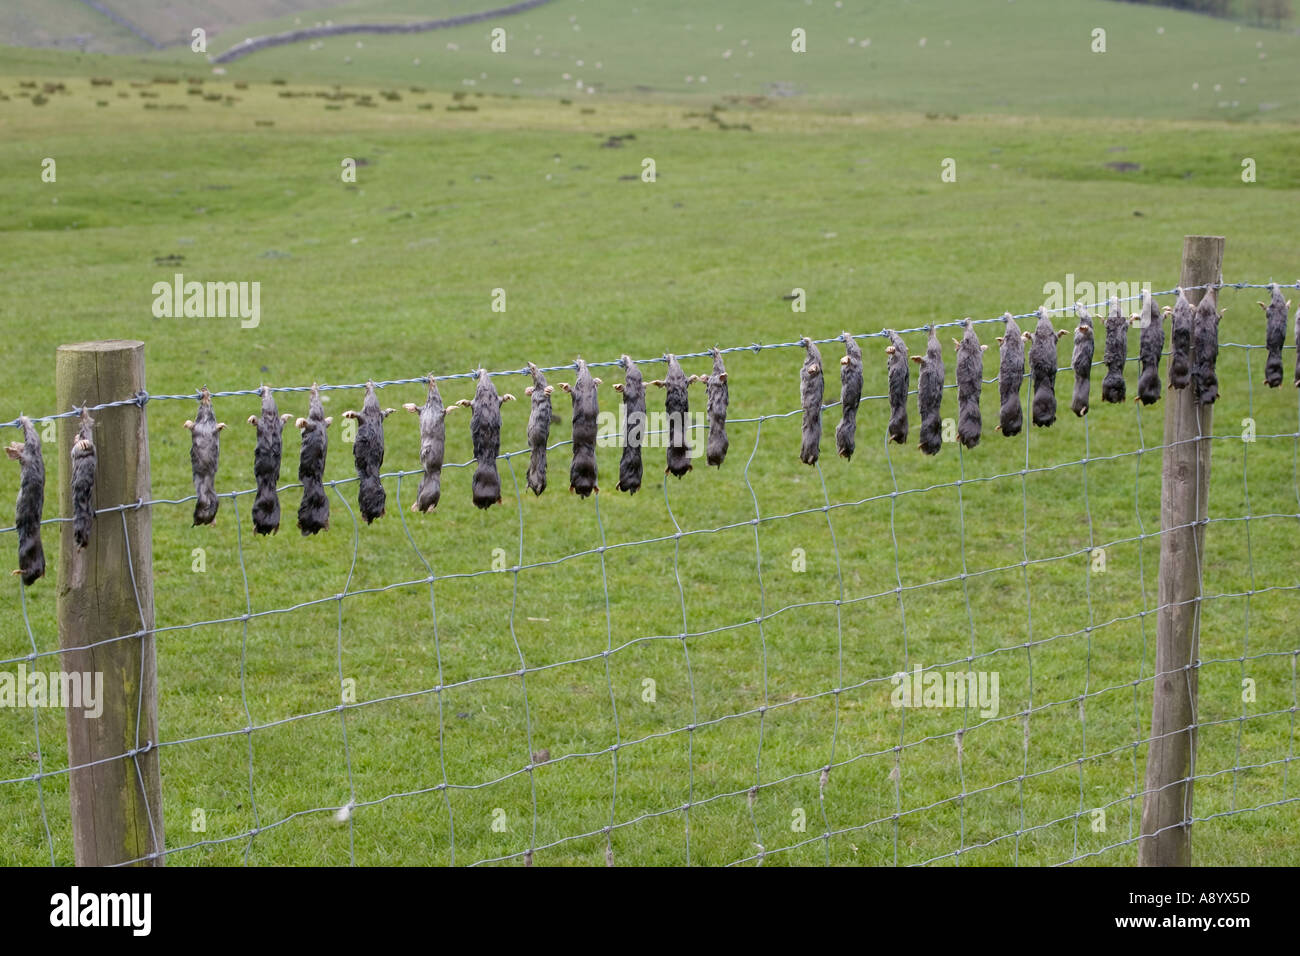 Dead moles hung on barbed wire fence near Settle Yorkshire UK Stock Photo